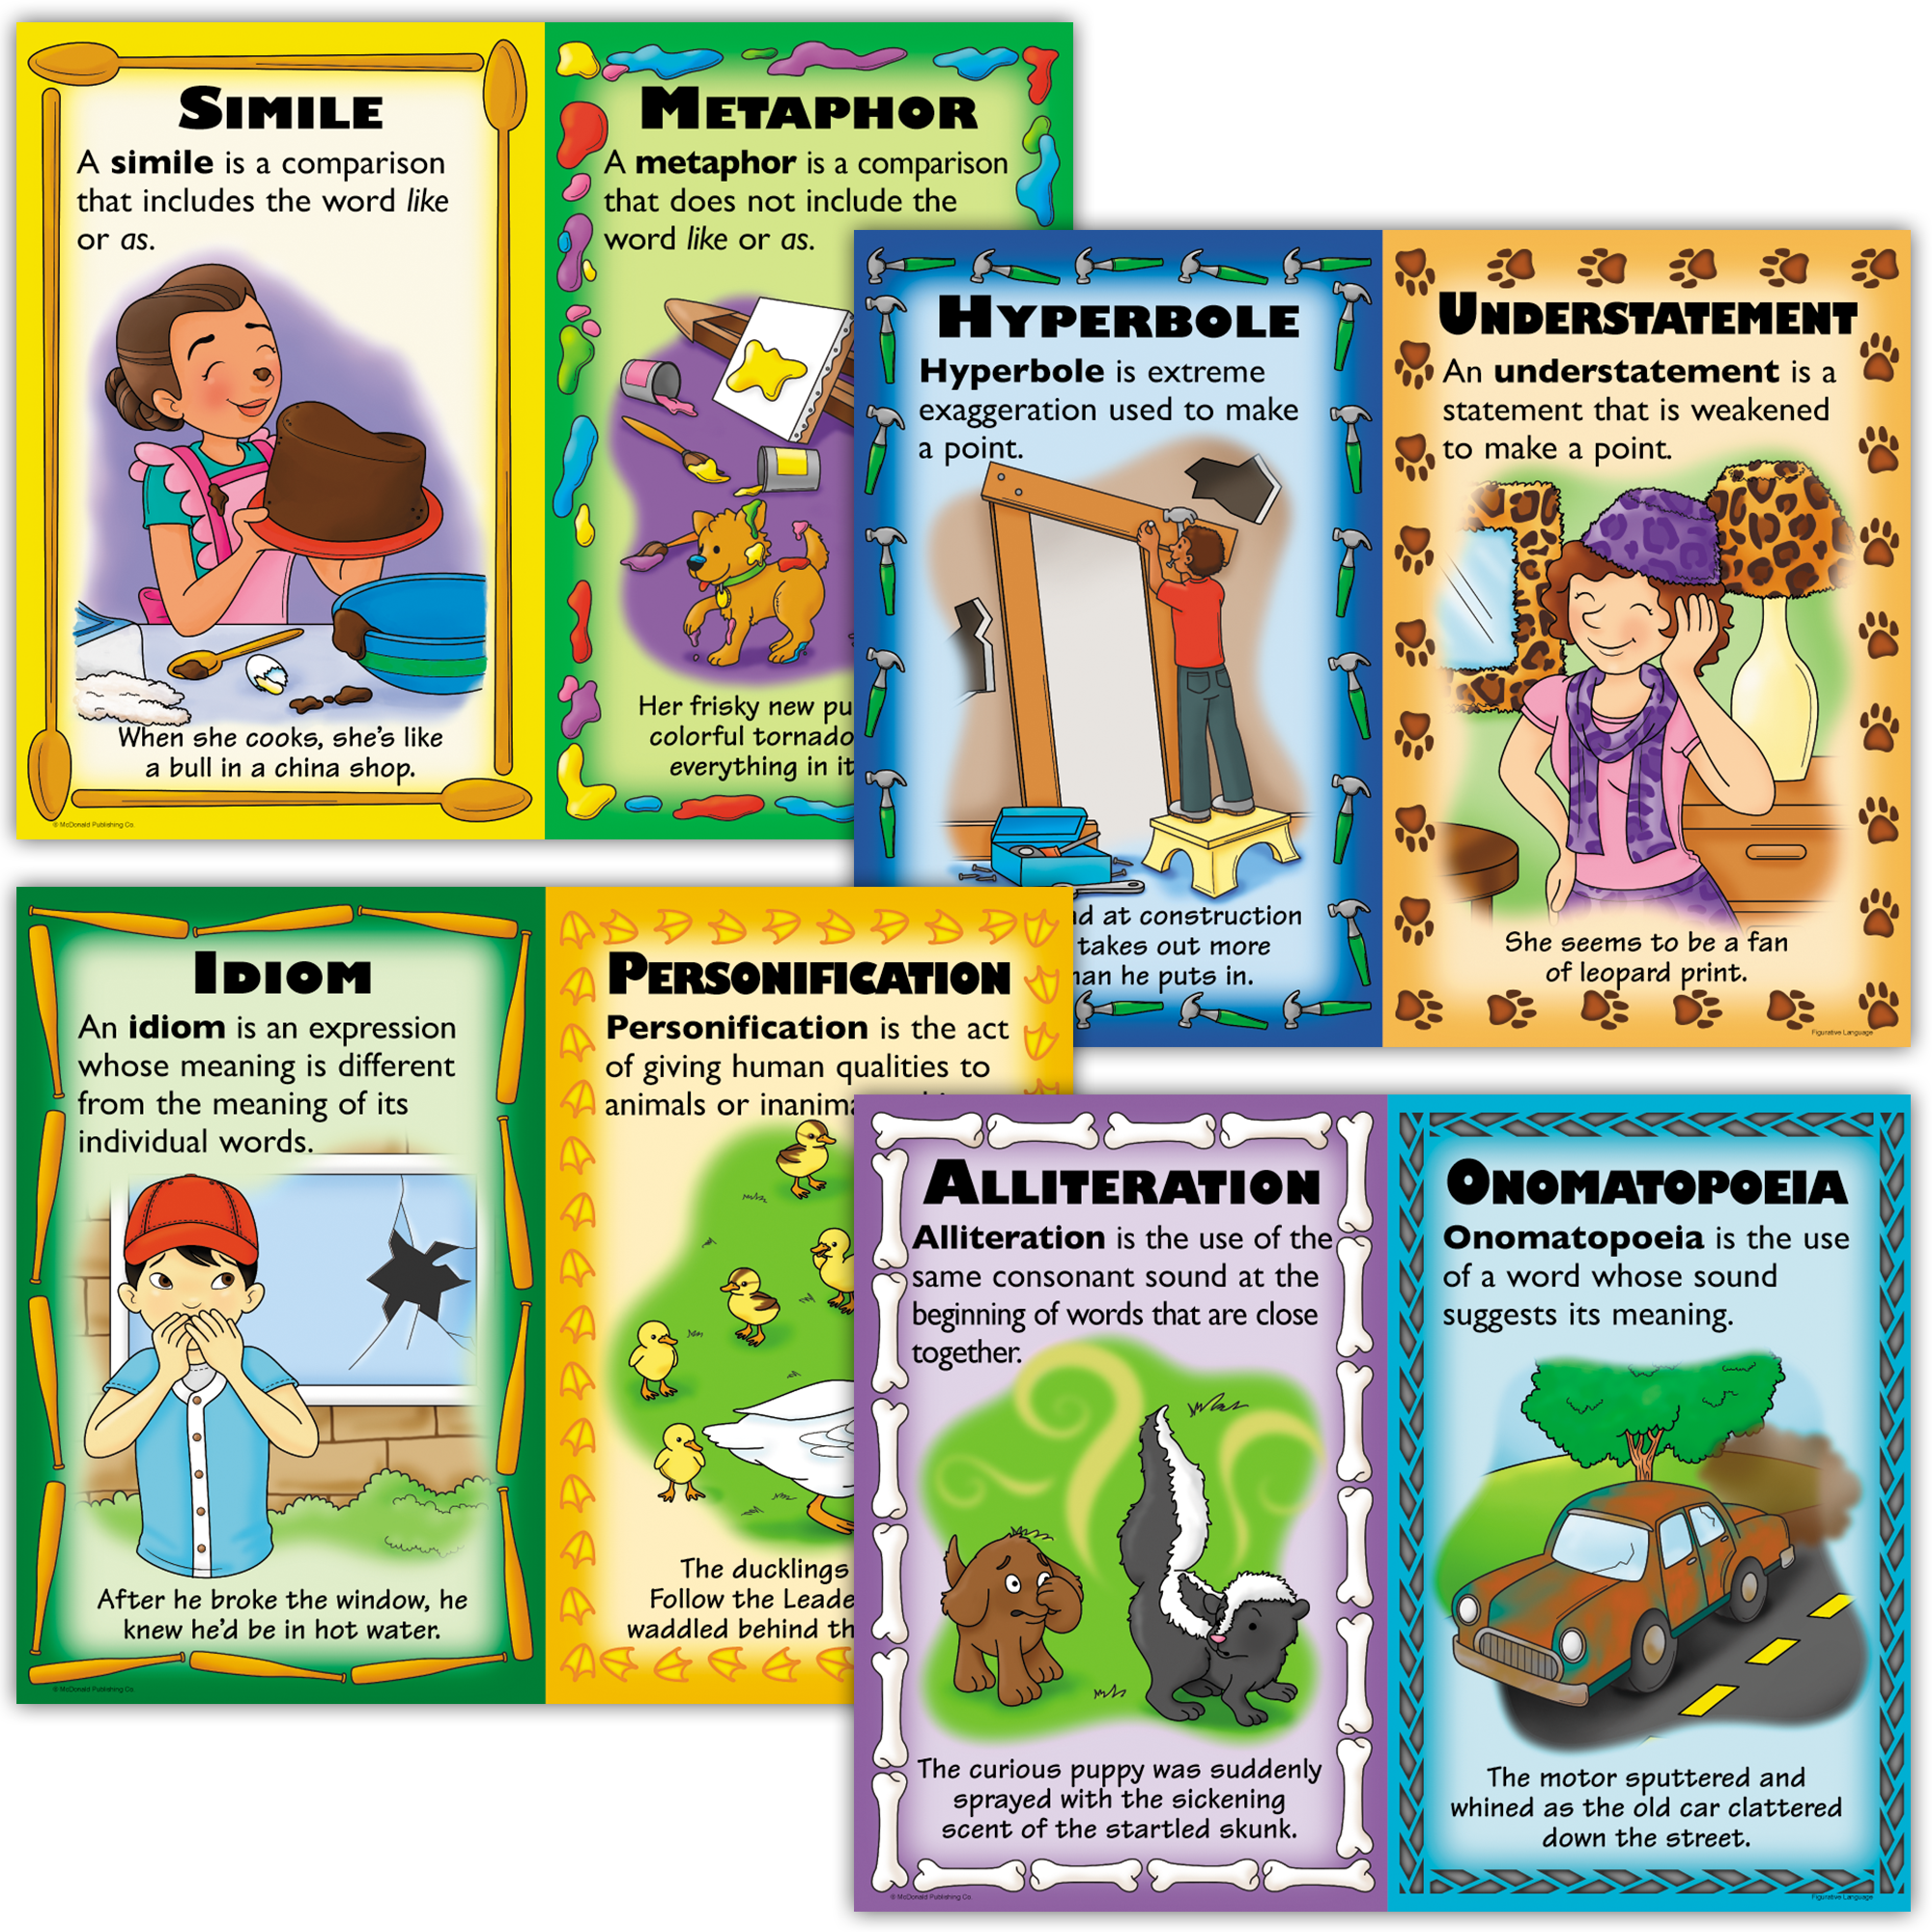 These bright posters clearly define and provide illustrated examples of the following forms of figurative language: simile, metaphor, hyperbole, understatement, idiom, personification, alliteration, and onomatopeia. Package includes 4 posters, 4 reproducible activity sheets, and a helpful teacher’s guide.